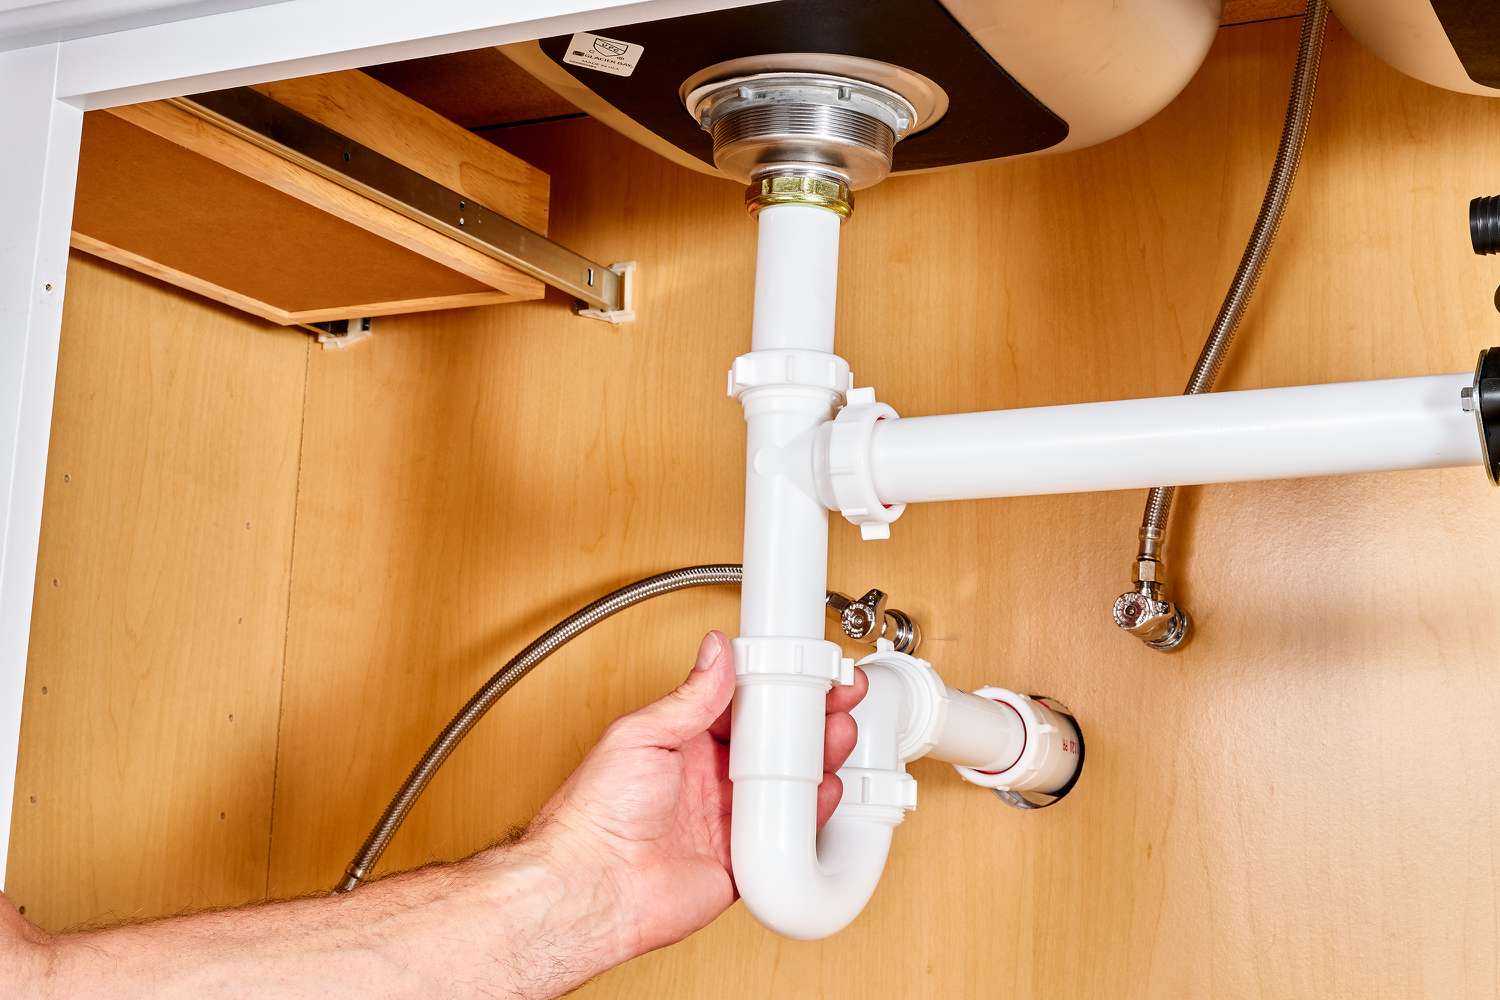 Drain trap connected to trap arm under sink